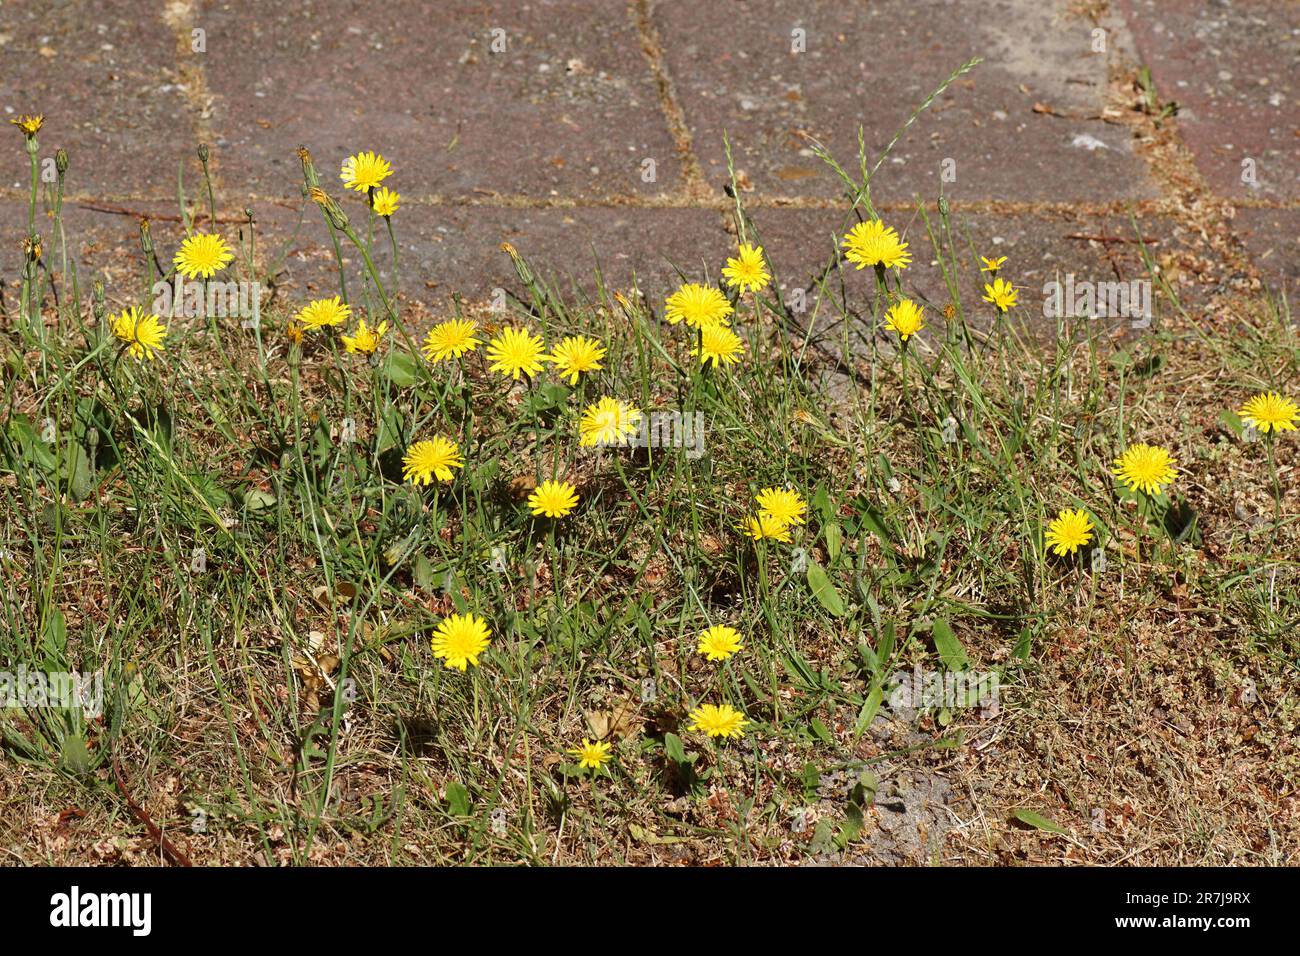 Flowers in a dry lawn along a tiled path of catsear, flatweed (Hypochaeris radicata). Family Asteraceae. June, Netherlands. Stock Photo